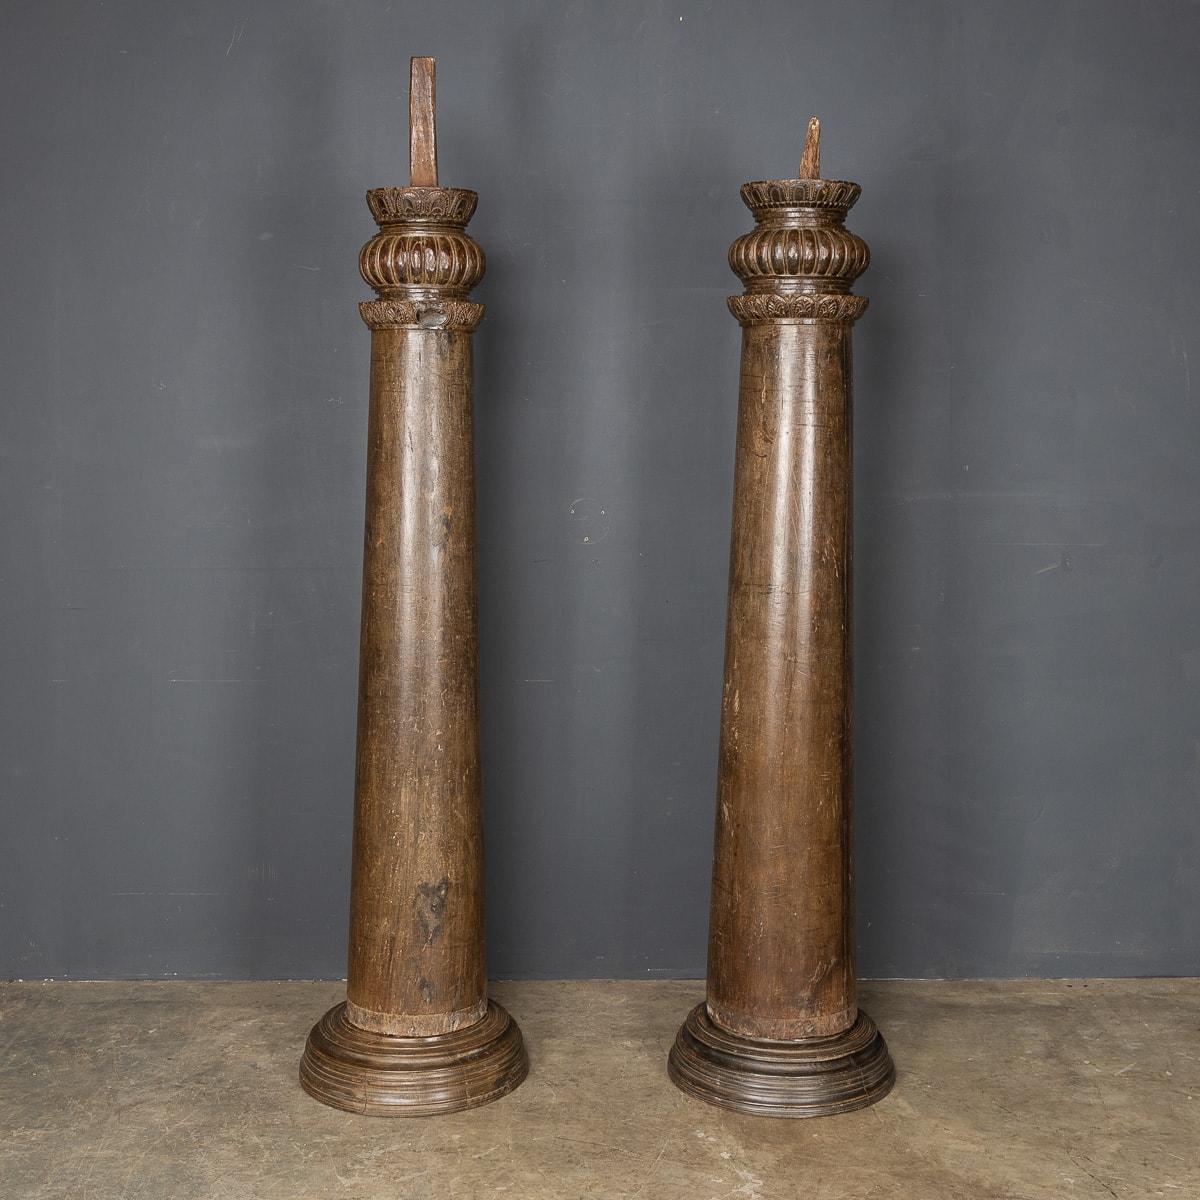 Antique mid-19th century Indian pair of hard wood, hand carved architectural columns.

Condition
In great condition - No Damage.

Size
Height: 163cm
Base Diameter: 42cm.